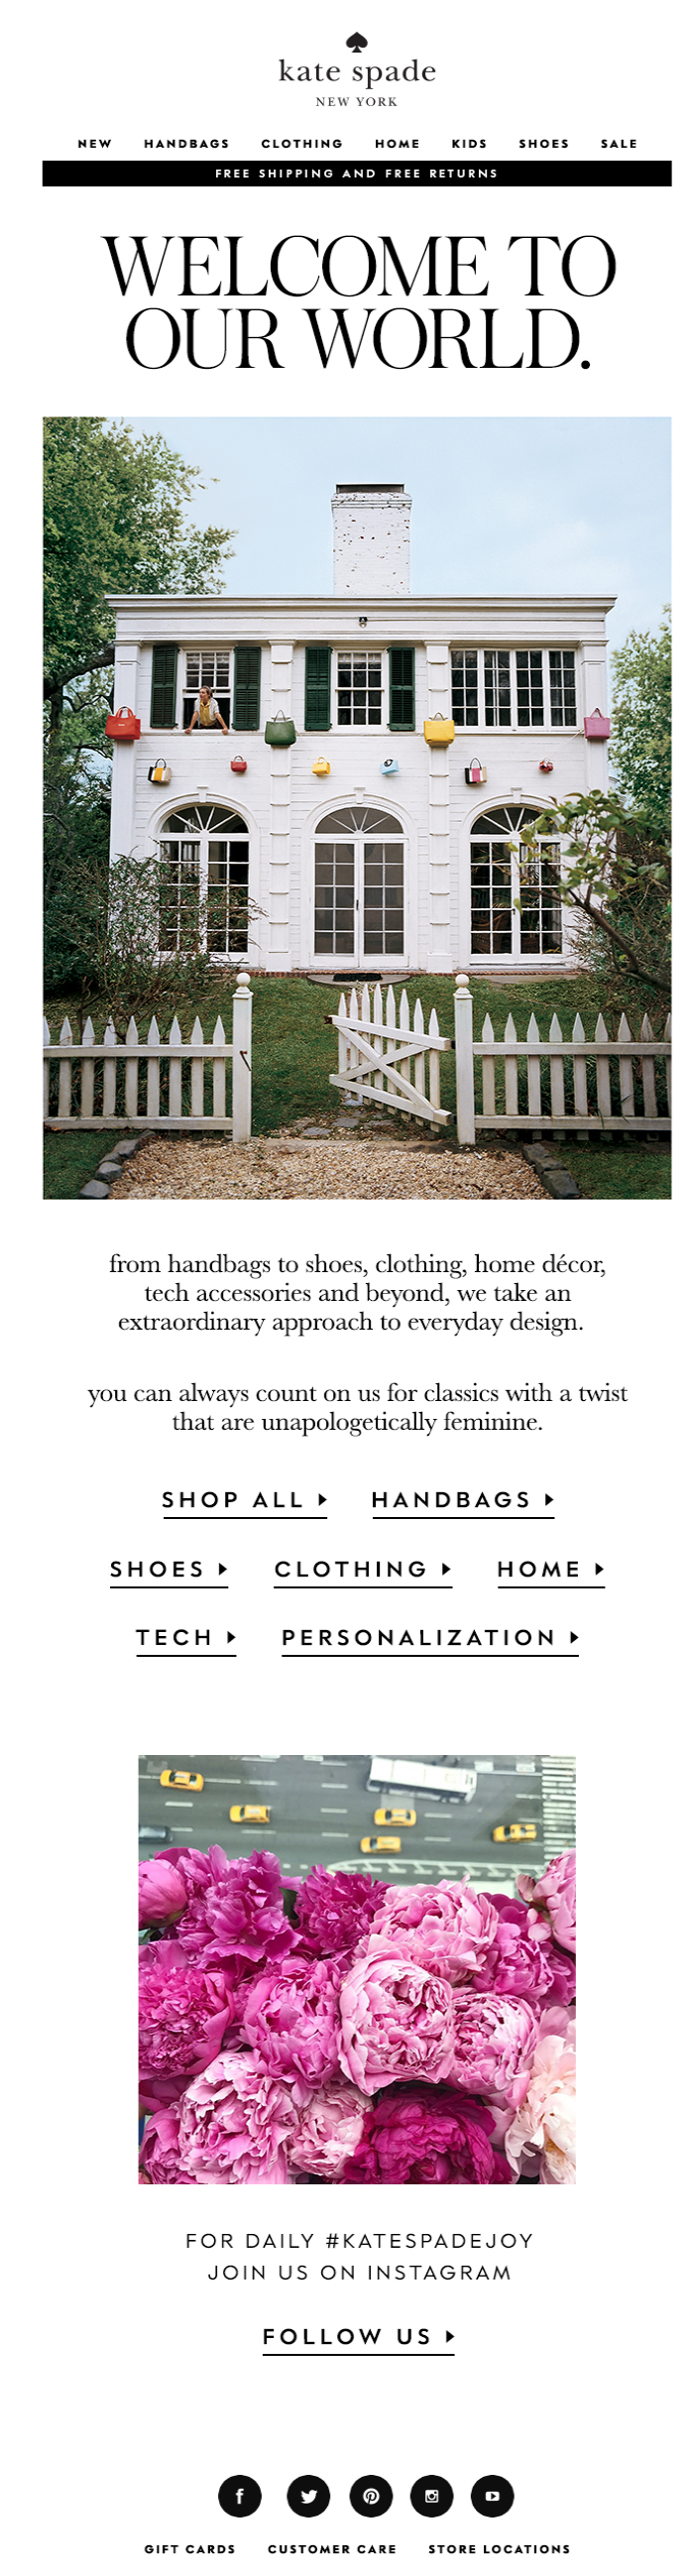 Welcome email by Kate Spade